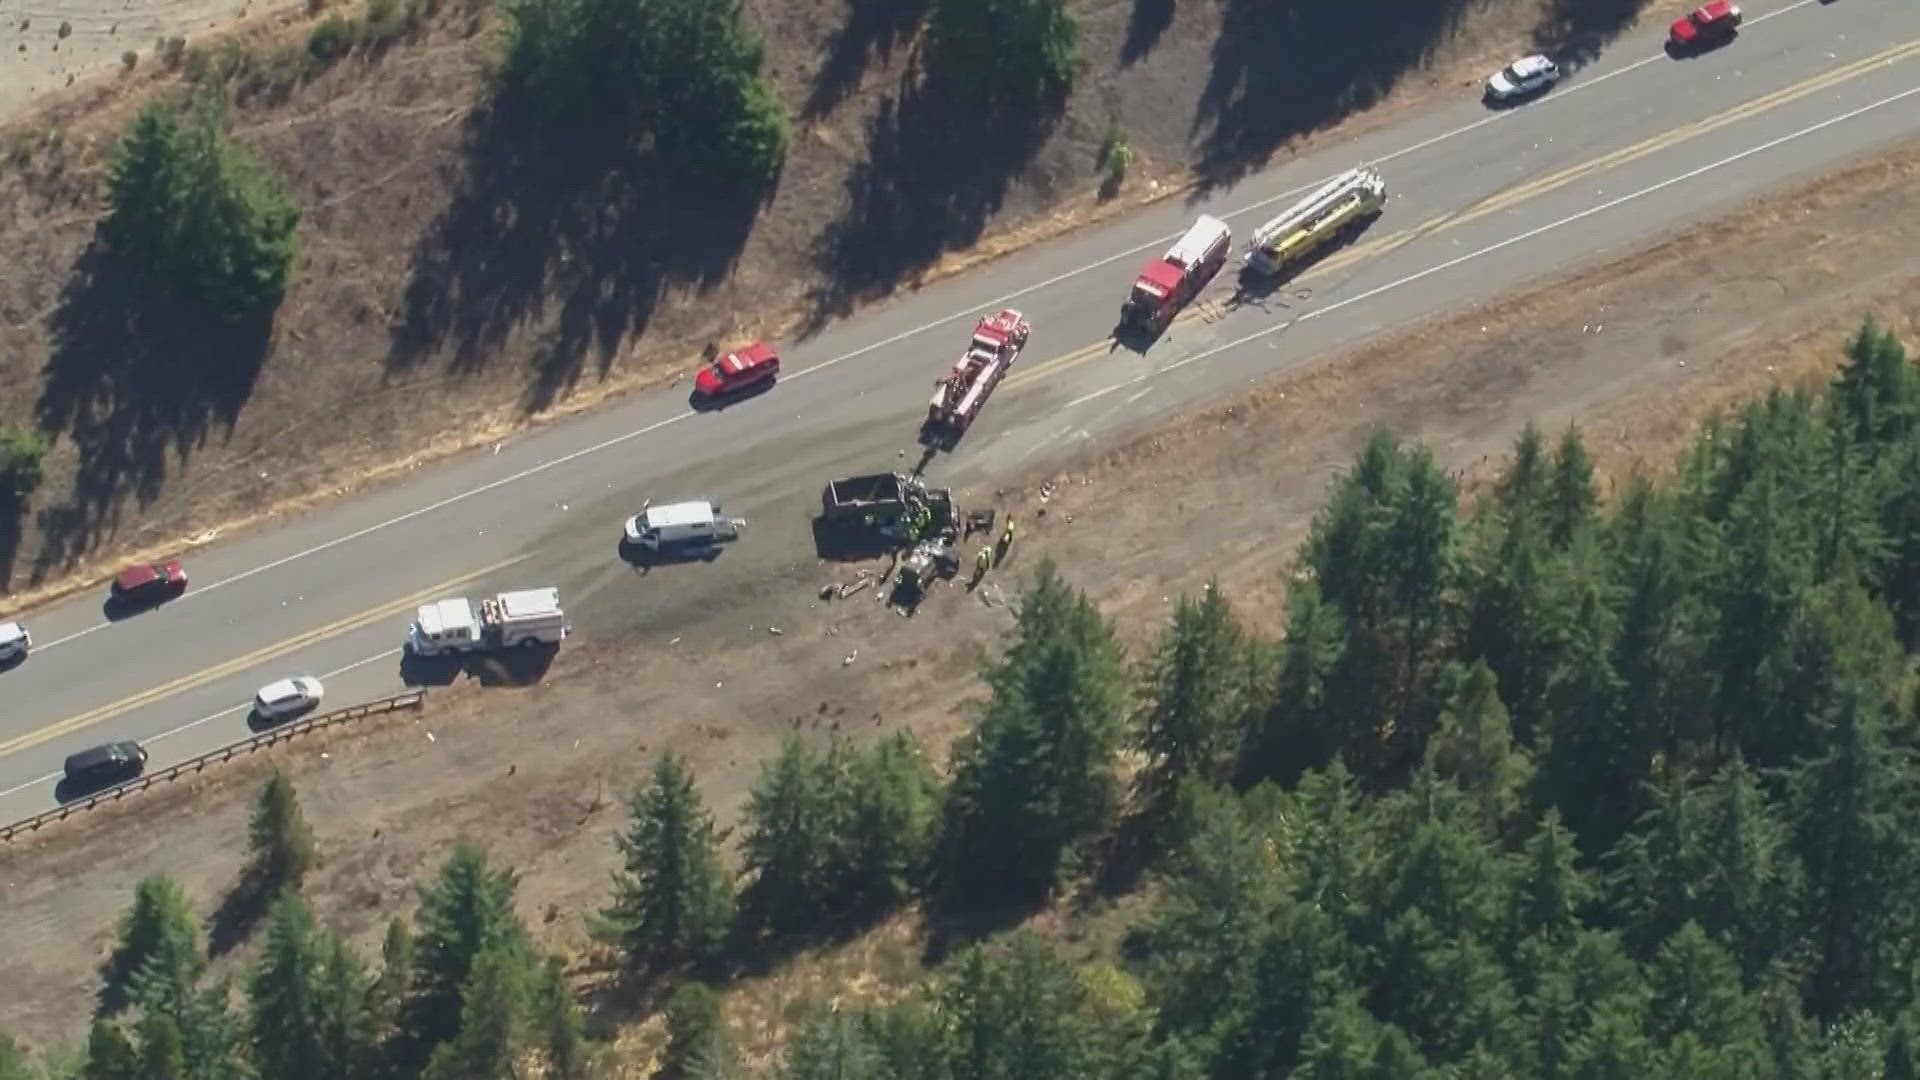 Two people were killed and two others were “seriously injured” in a head-on crash involving a commercial dump truck on US Route 101 near Shelton Wednesday morning.